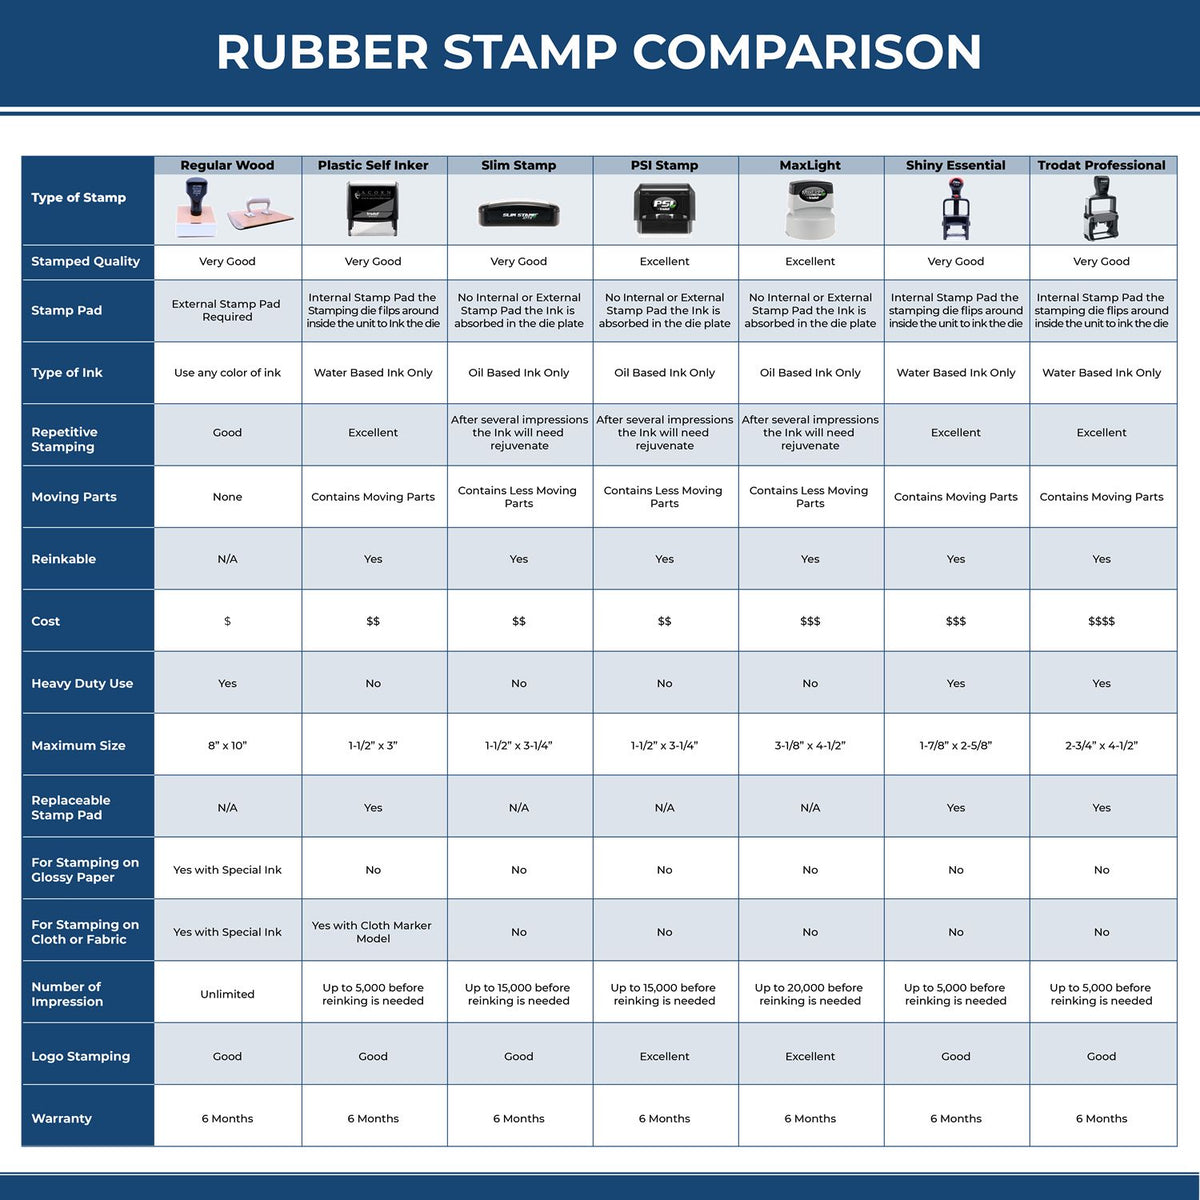 A comparison chart for the different types of mount models available for the Premium MaxLight Pre-Inked New York Landscape Architectural Stamp.